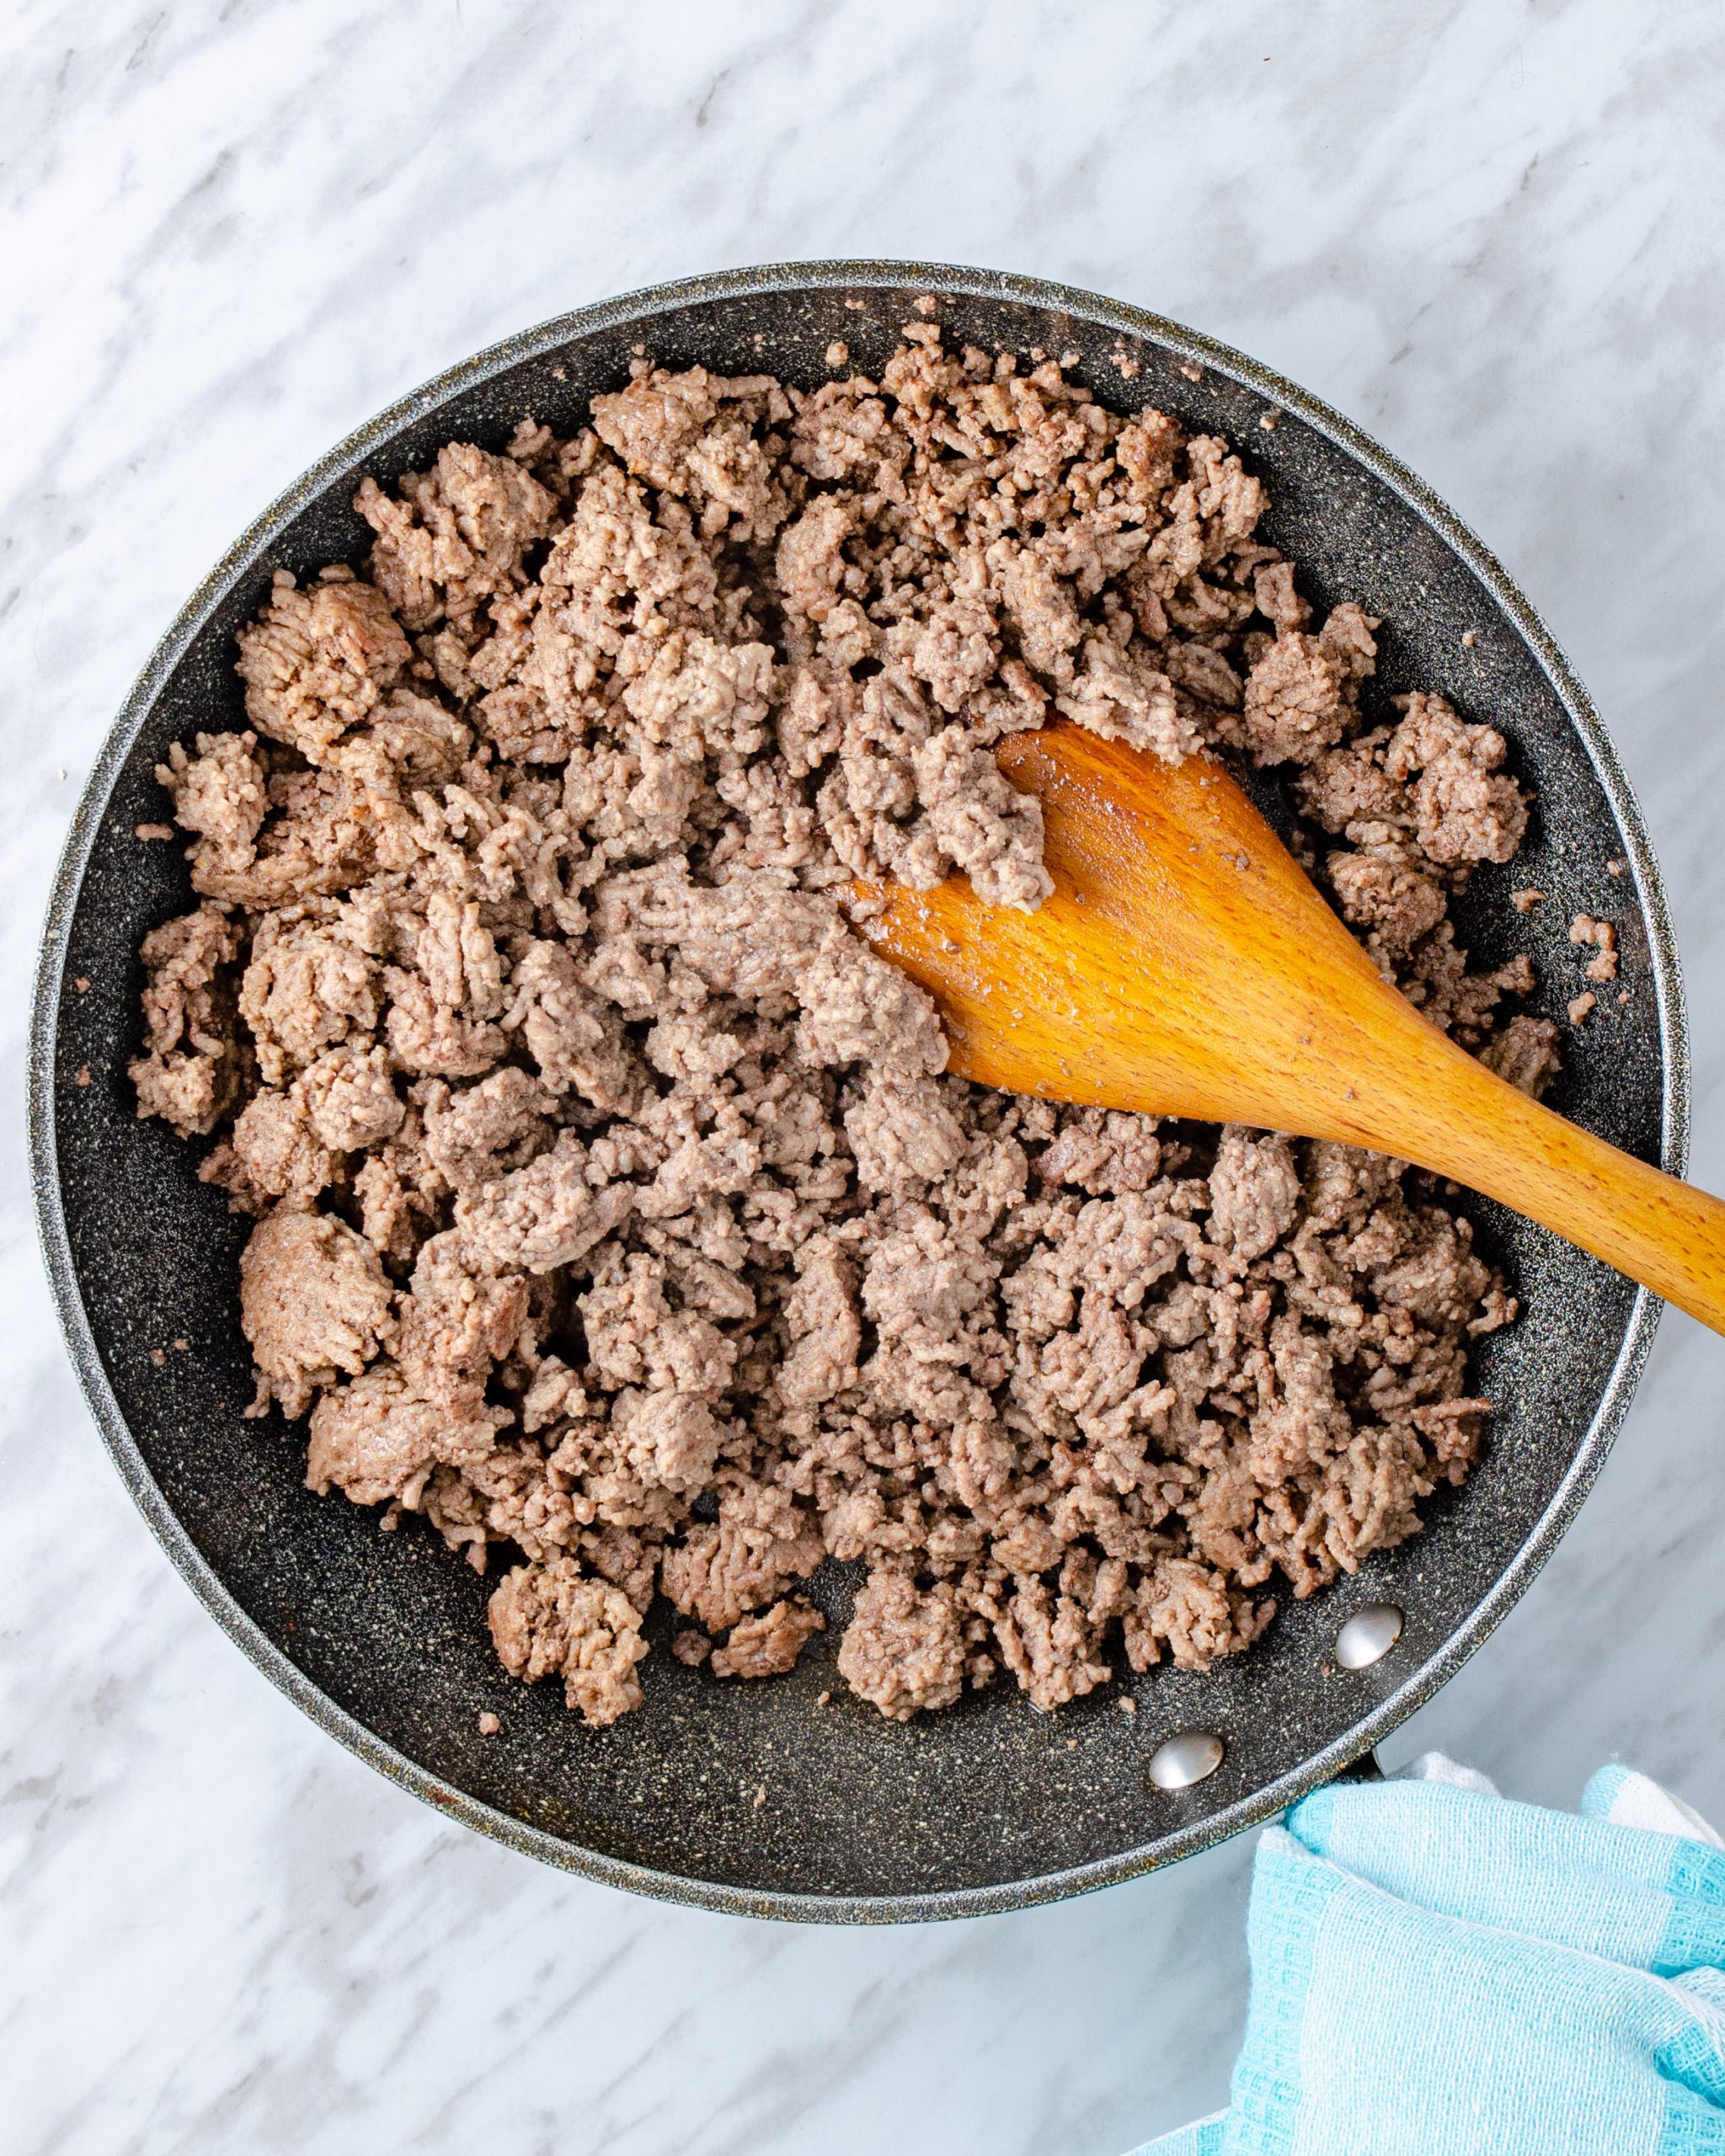 Add the ground beef to a large skillet over medium-high heat on the stove, and saute until the meat is completely browned. Drain any excess fat.